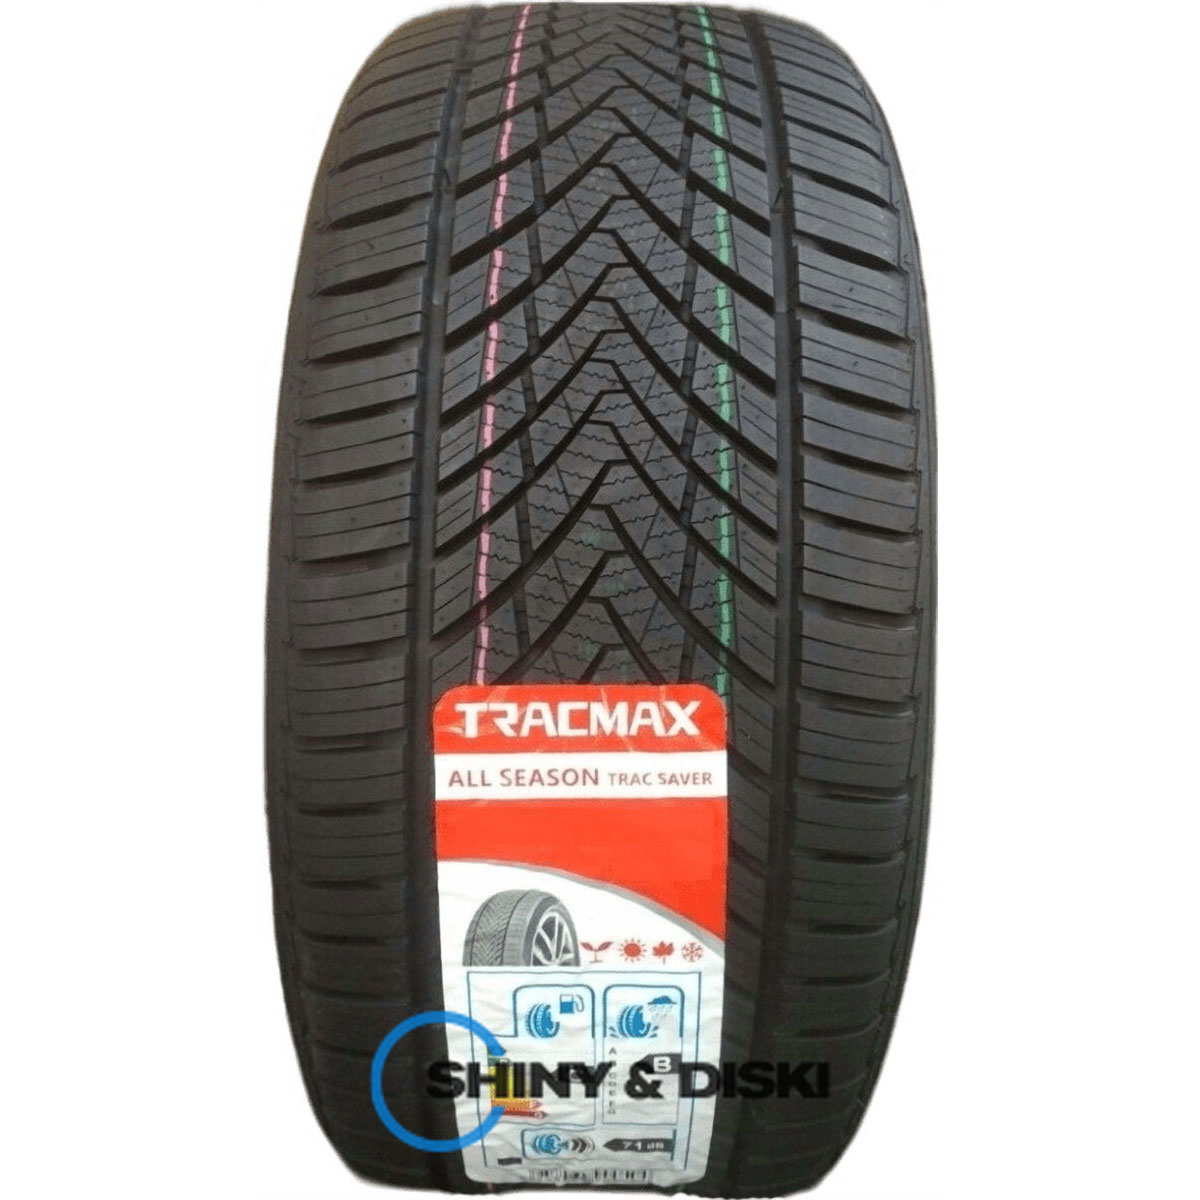 покрышки tracmax a/s trac saver 195/65 r15 91h